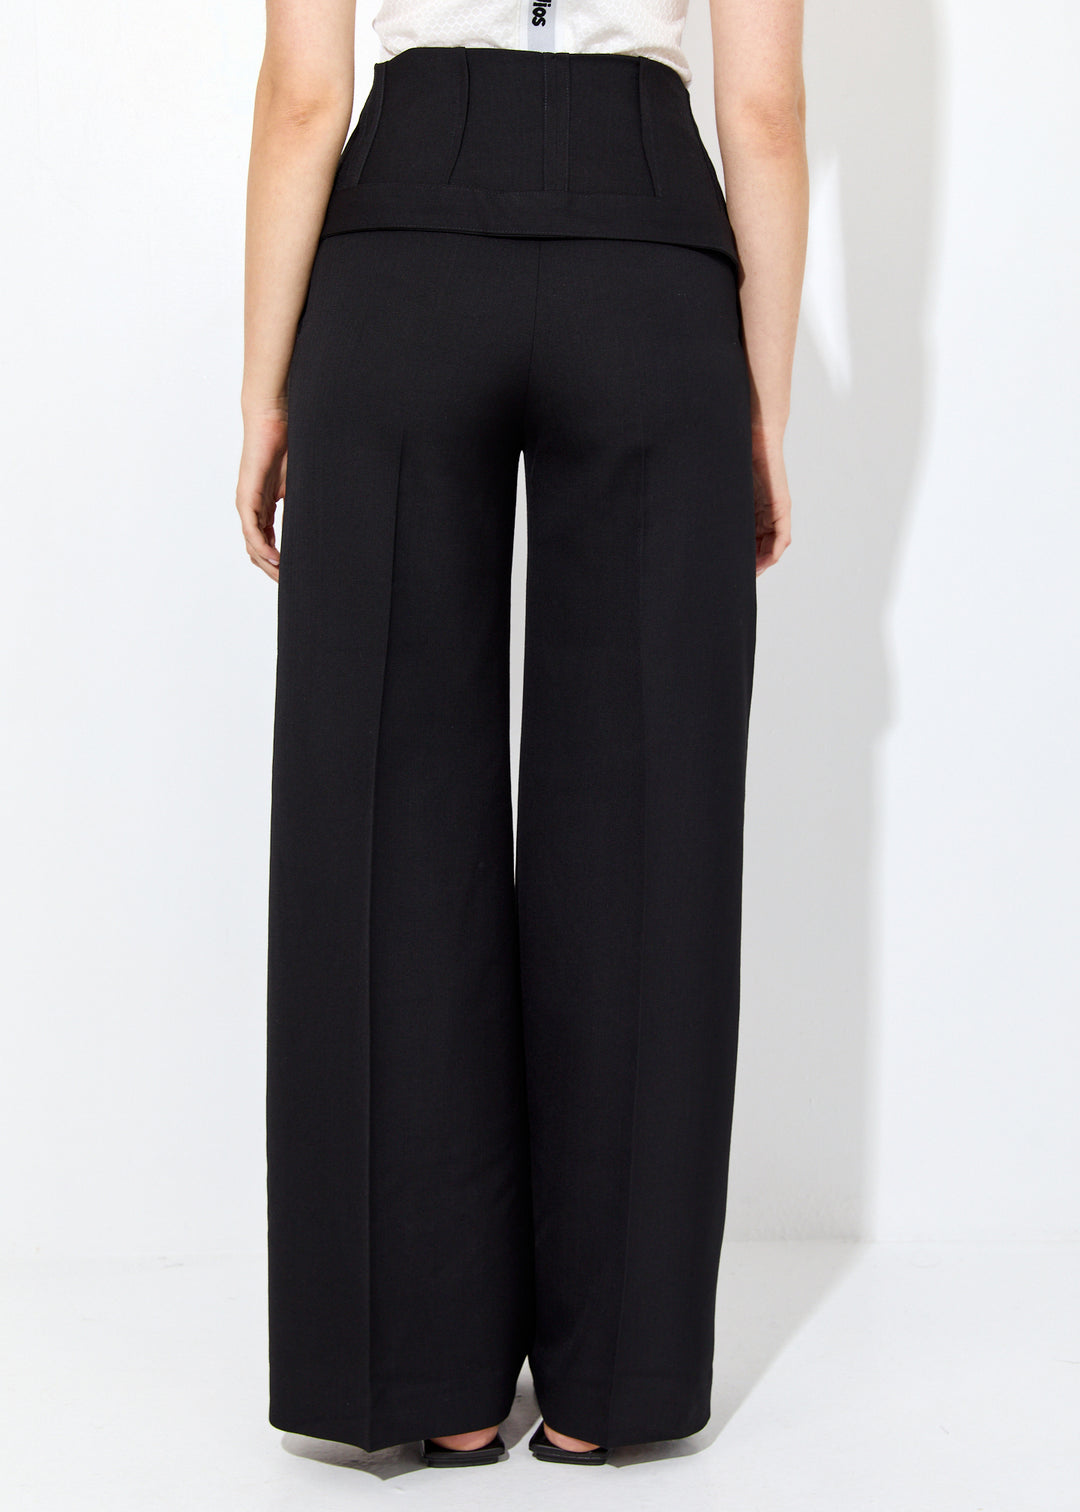 Tailored wool blend trousers